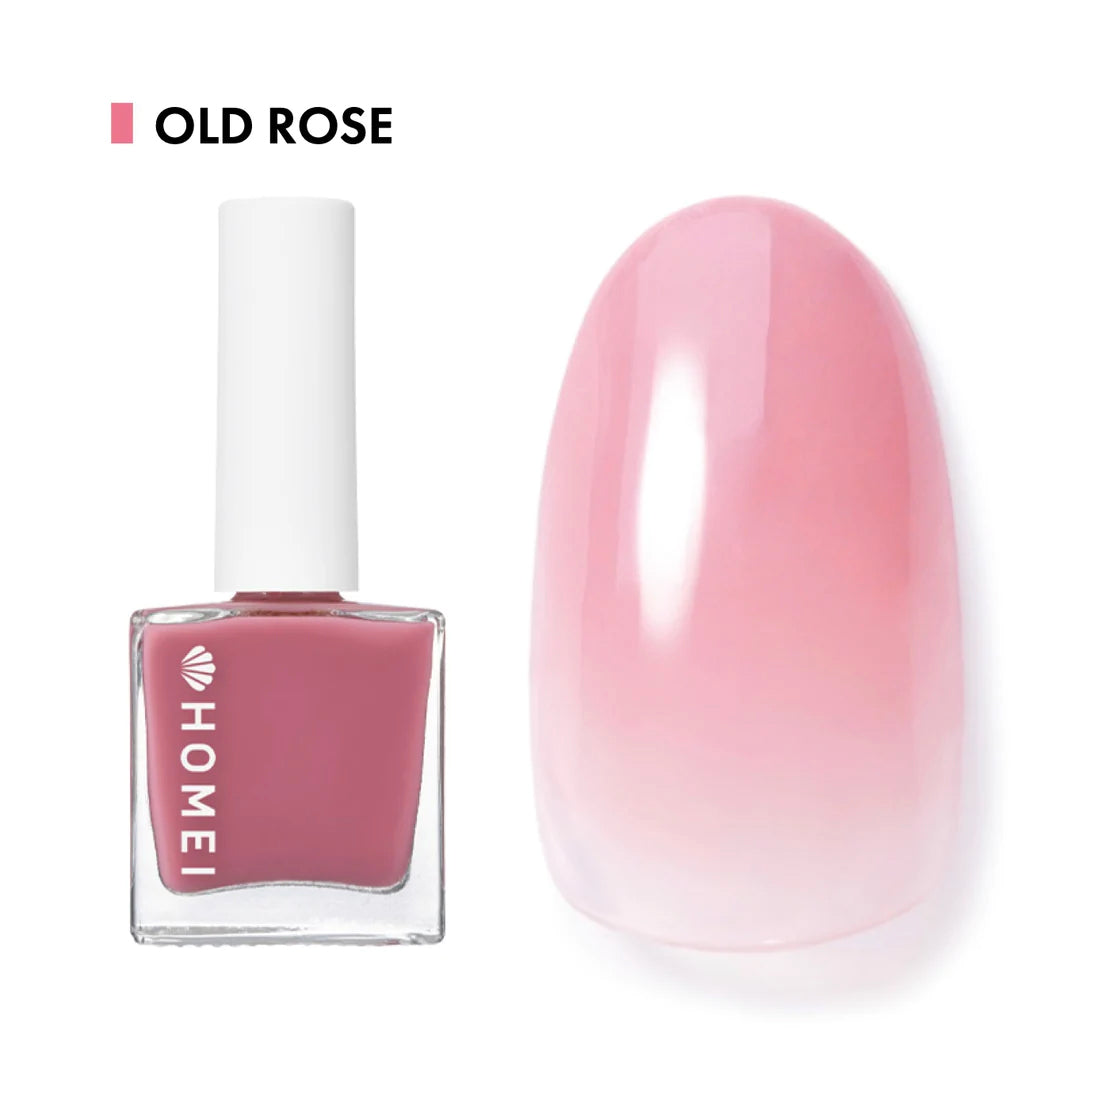 HOMEI 12 Free Nail Hardener Old Rose Nail Polishes Homei   